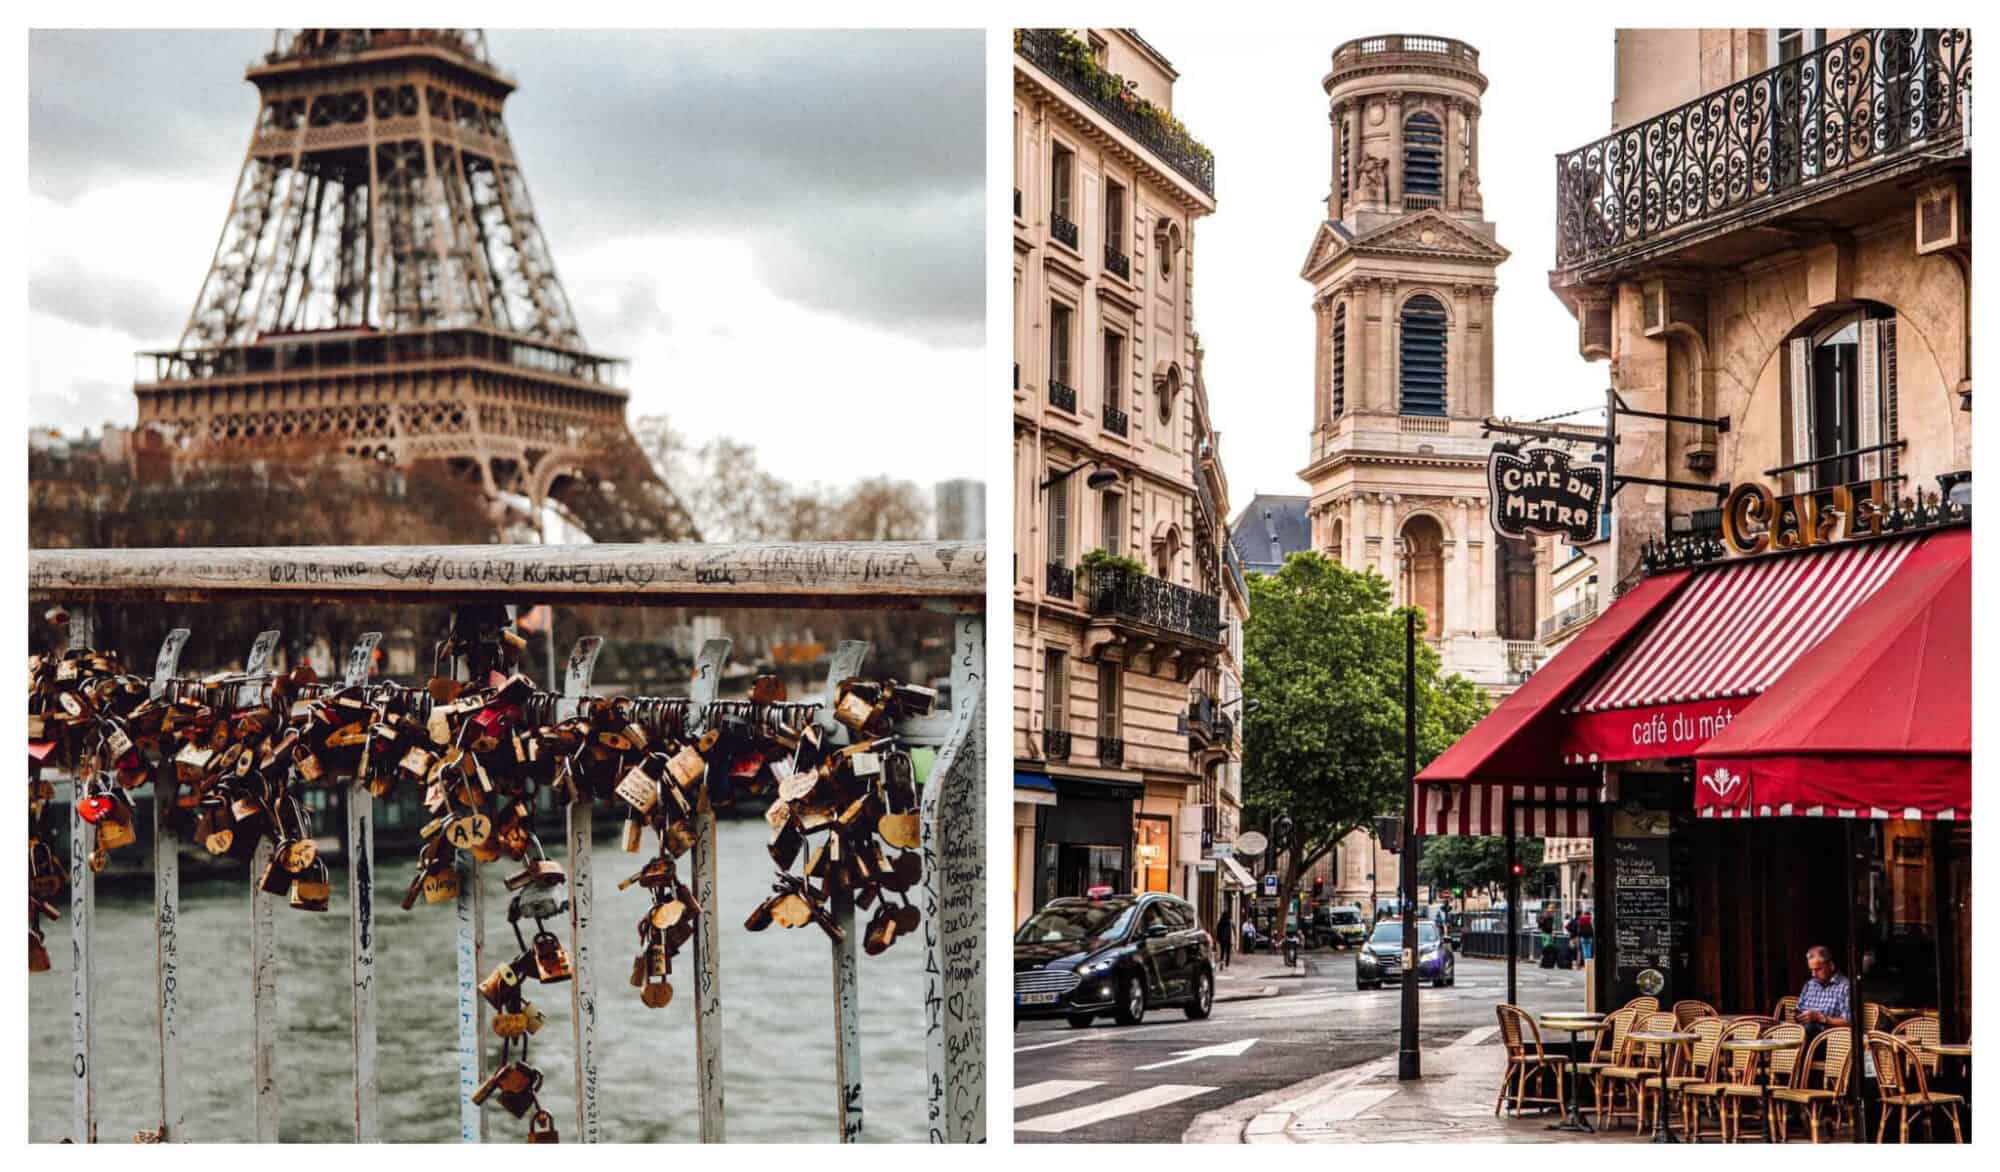 Left: a grid in front of the Eiffel Tower that is full of metal locks. Right: A Parisian street with a restaurant and a church tower behind.